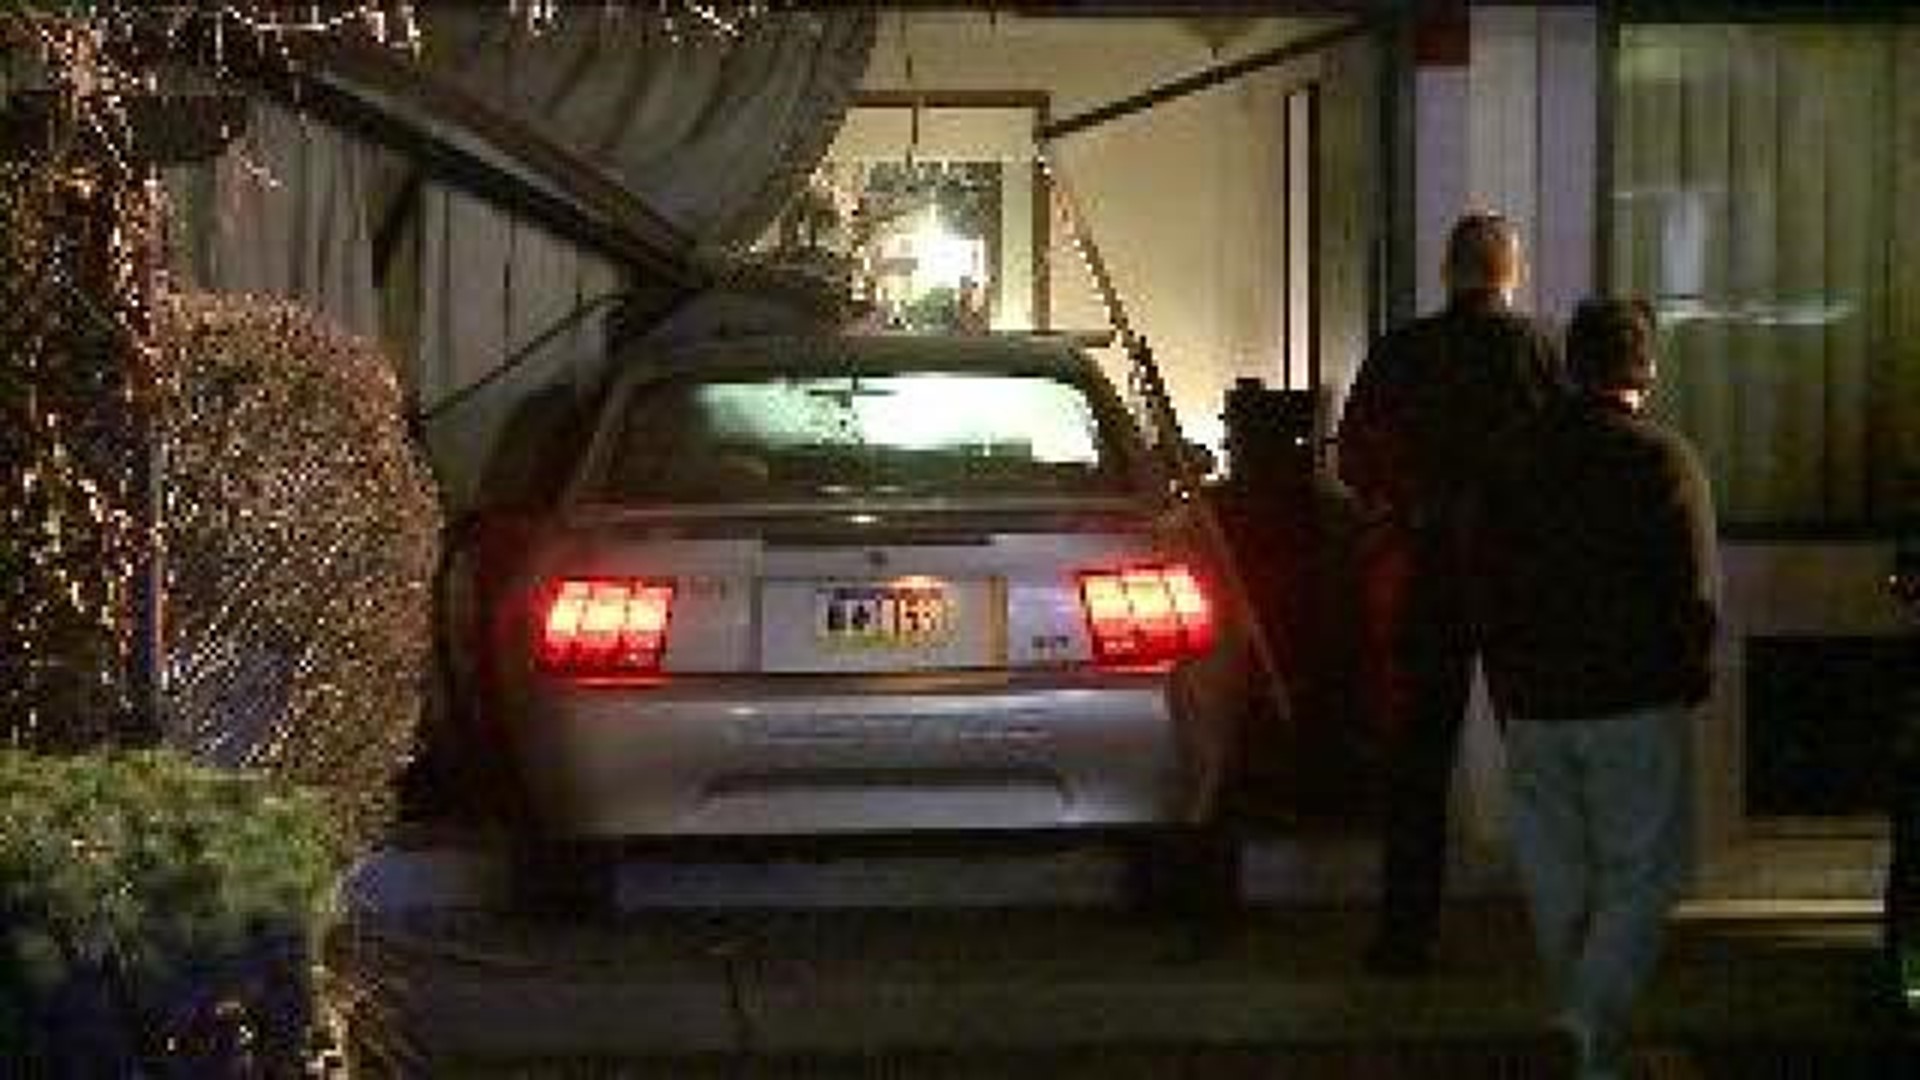 Police Chase Ends When Car Slams Into Hotel Room